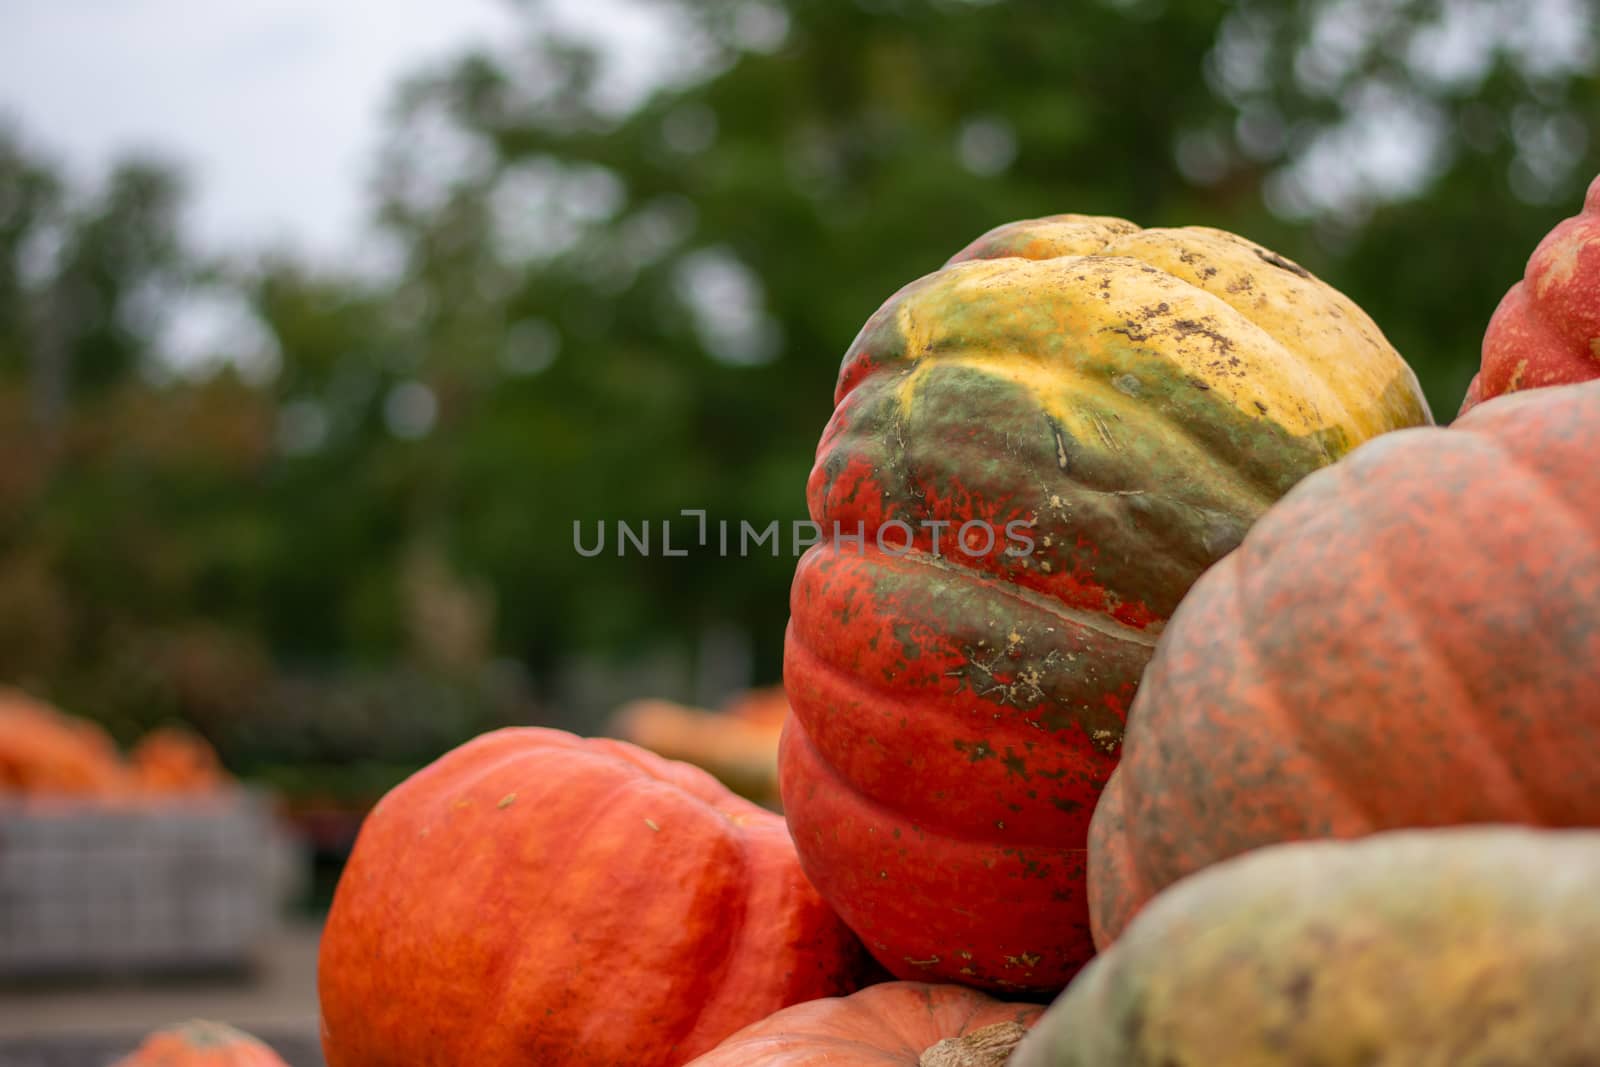 A Large Orange and Green Pumpkin in a Pile at a Farmer's Market by bju12290